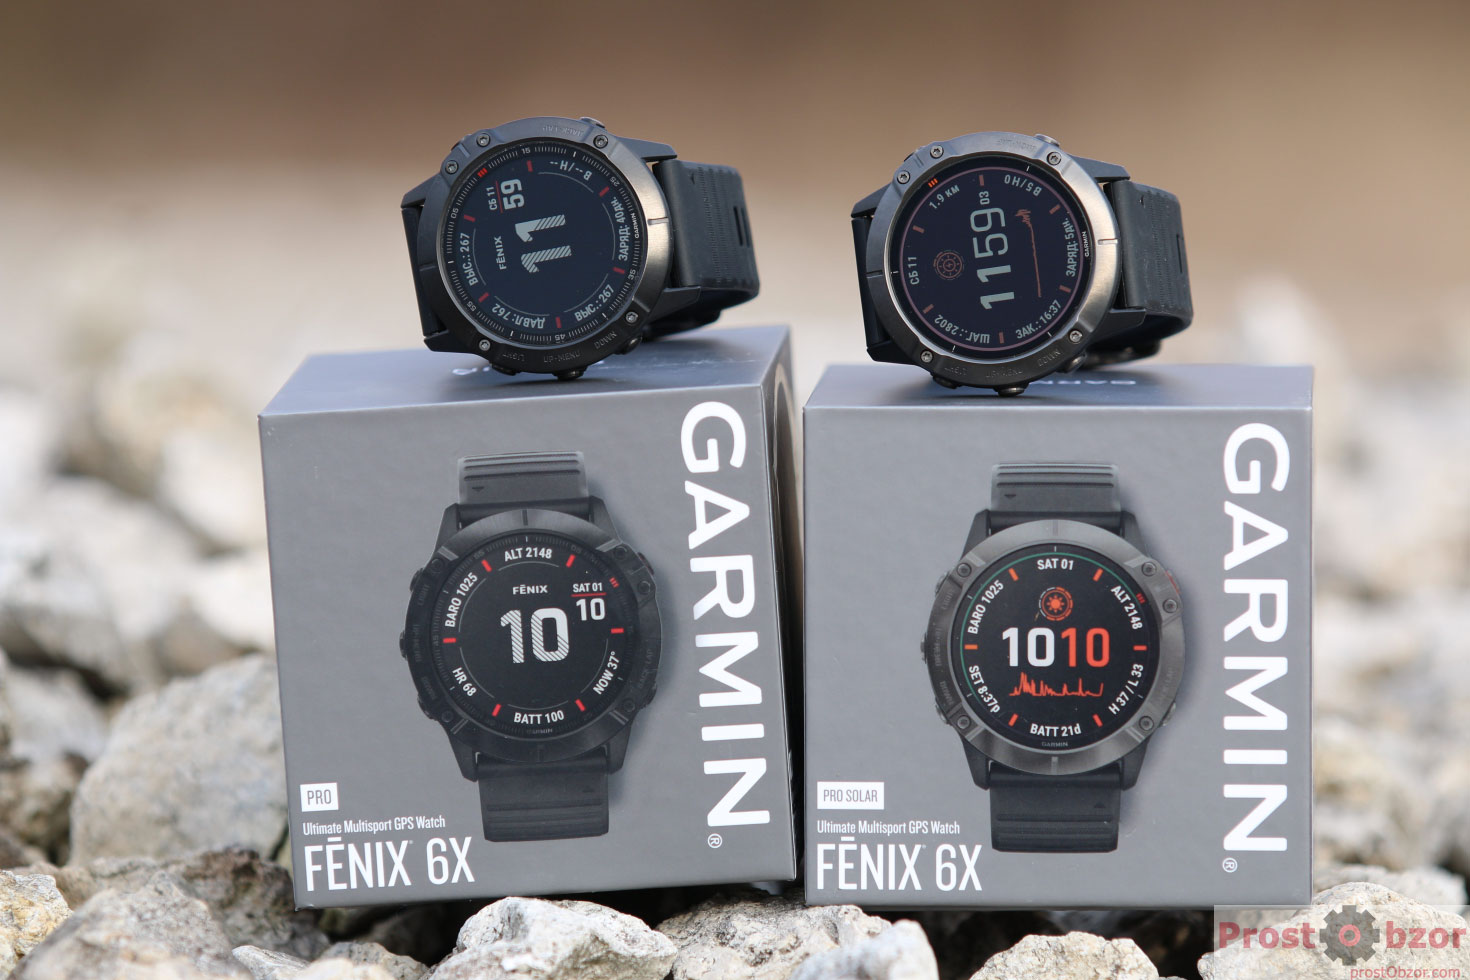 Garmin Fenix 6X Pro Solar comparison and test in the detailed review